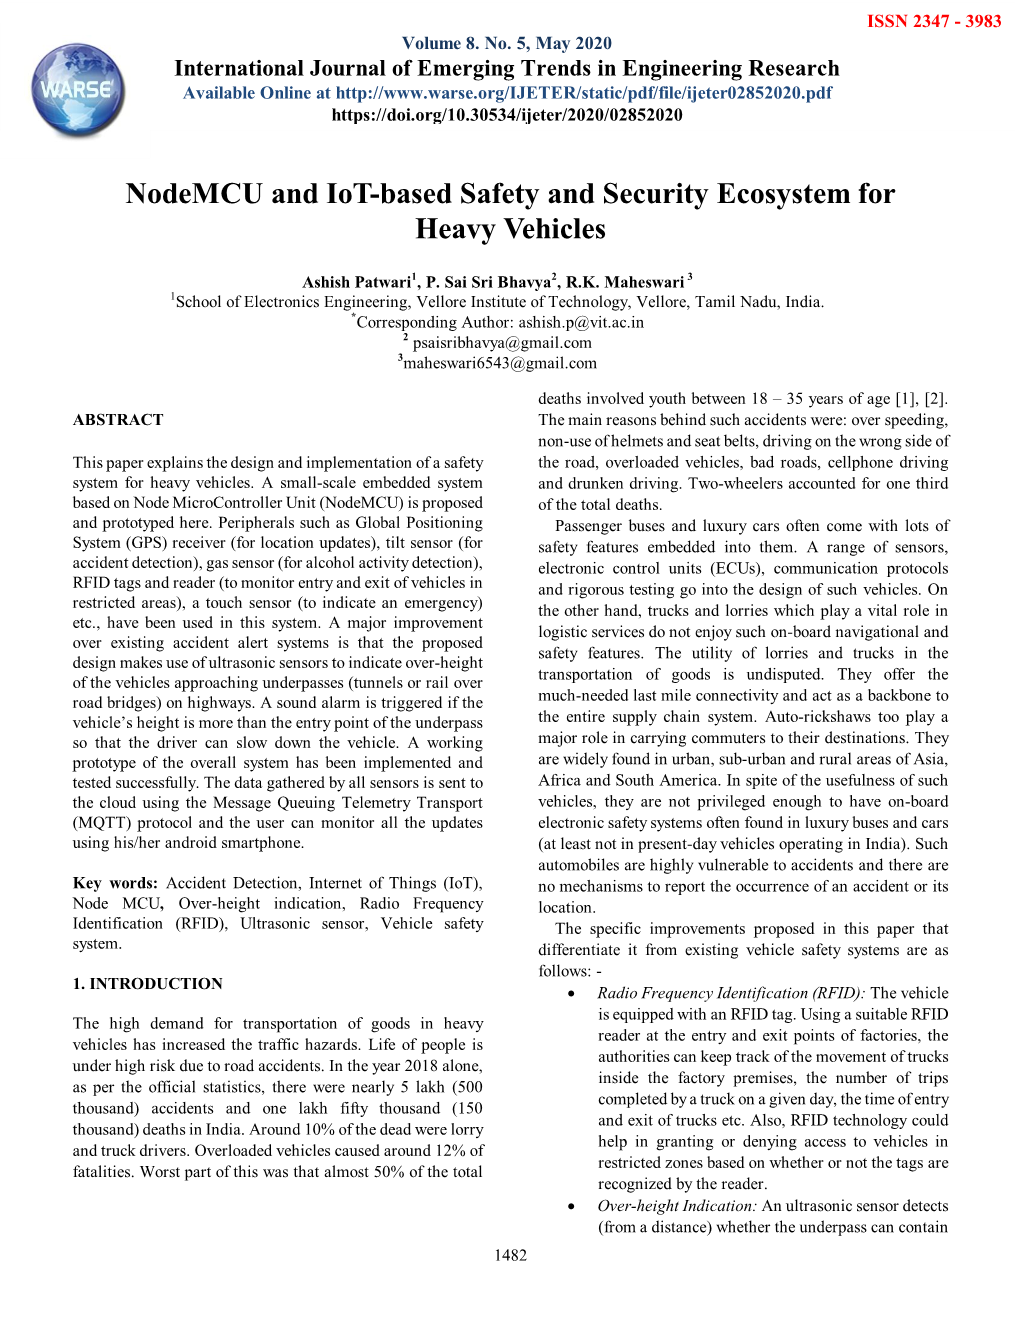 Nodemcu and Iot-Based Safety and Security Ecosystem for Heavy Vehicles